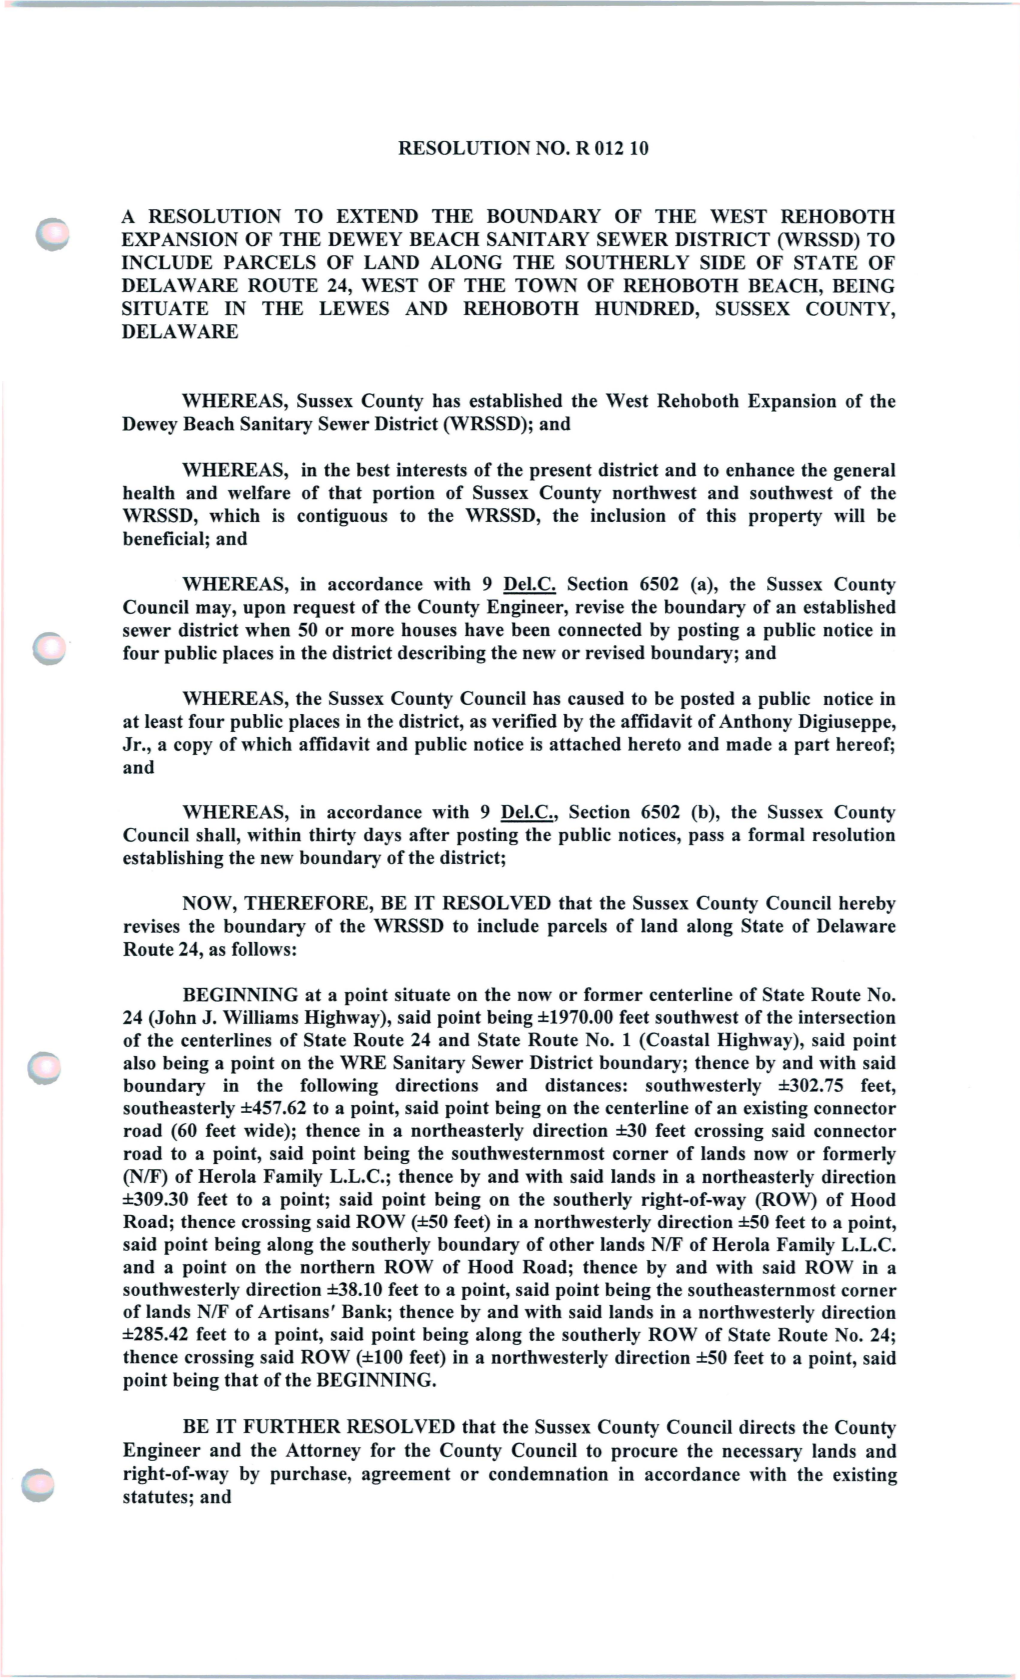 Resolution No. R 012 10 a Resolution to Extend The